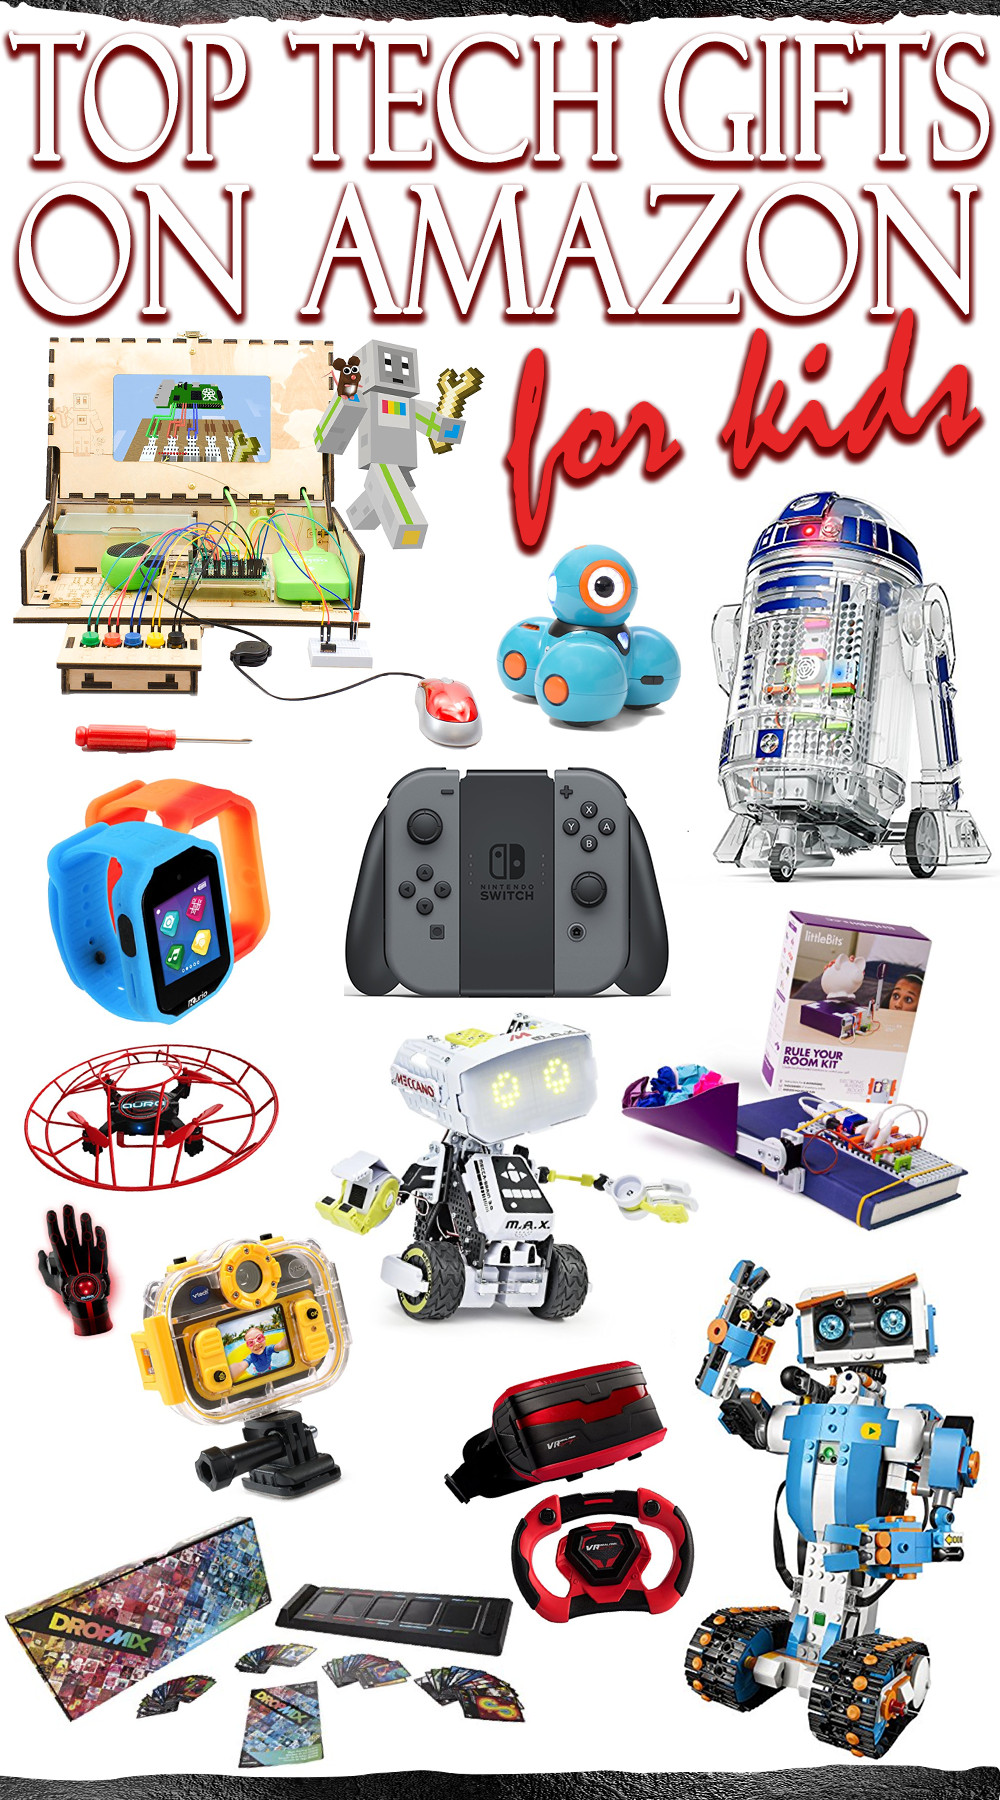 Best Tech Gifts For Kids
 Top Tech Gifts for Kids on Amazon